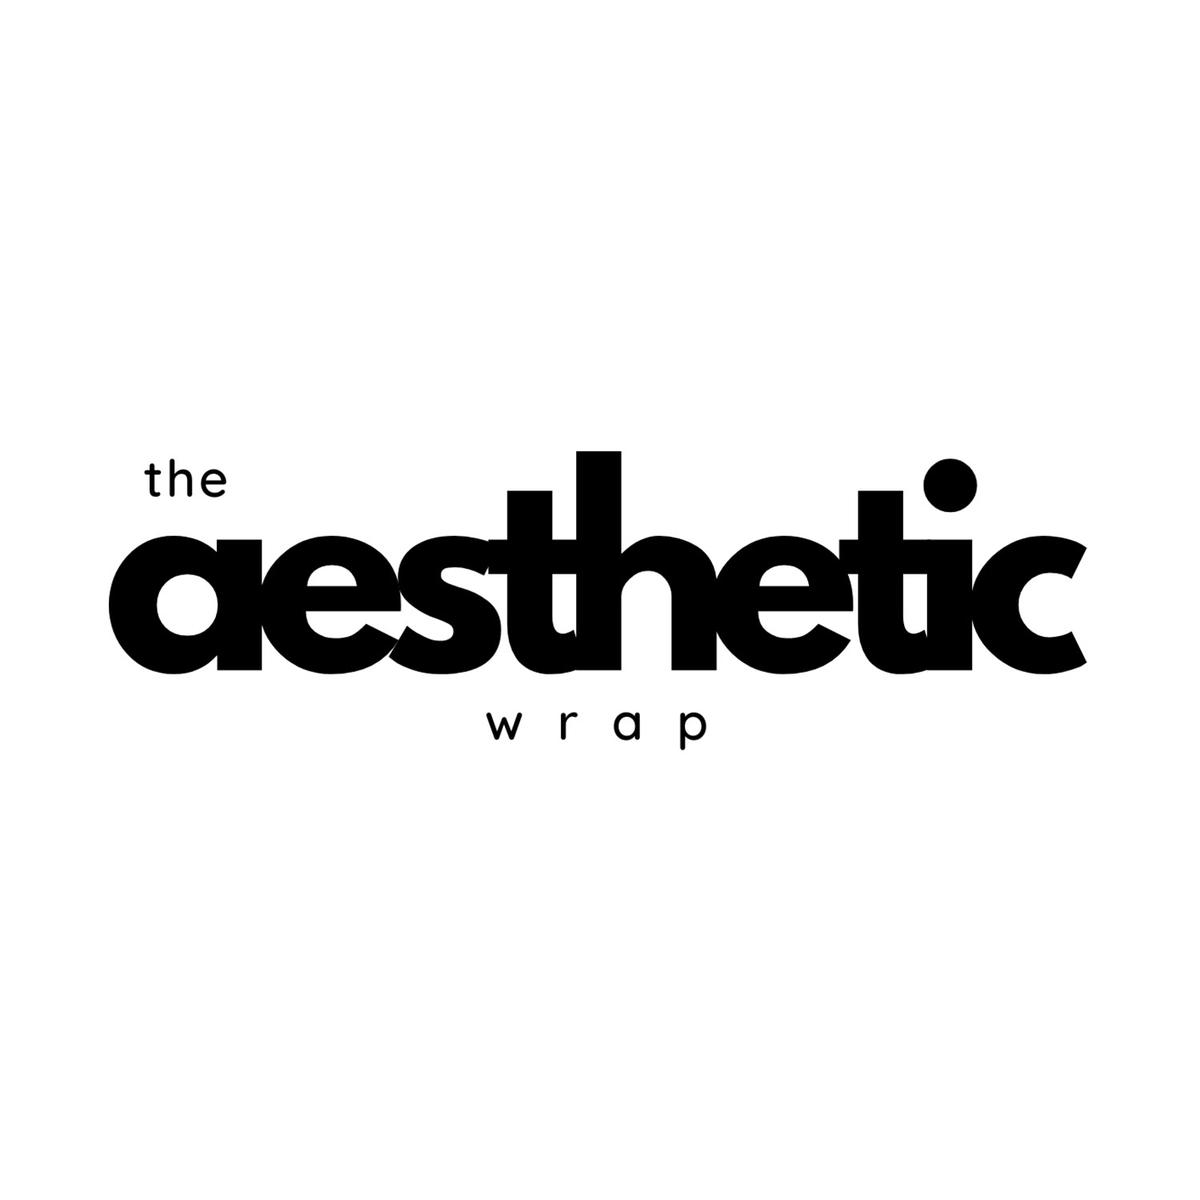 Aesthetic Wrap's images